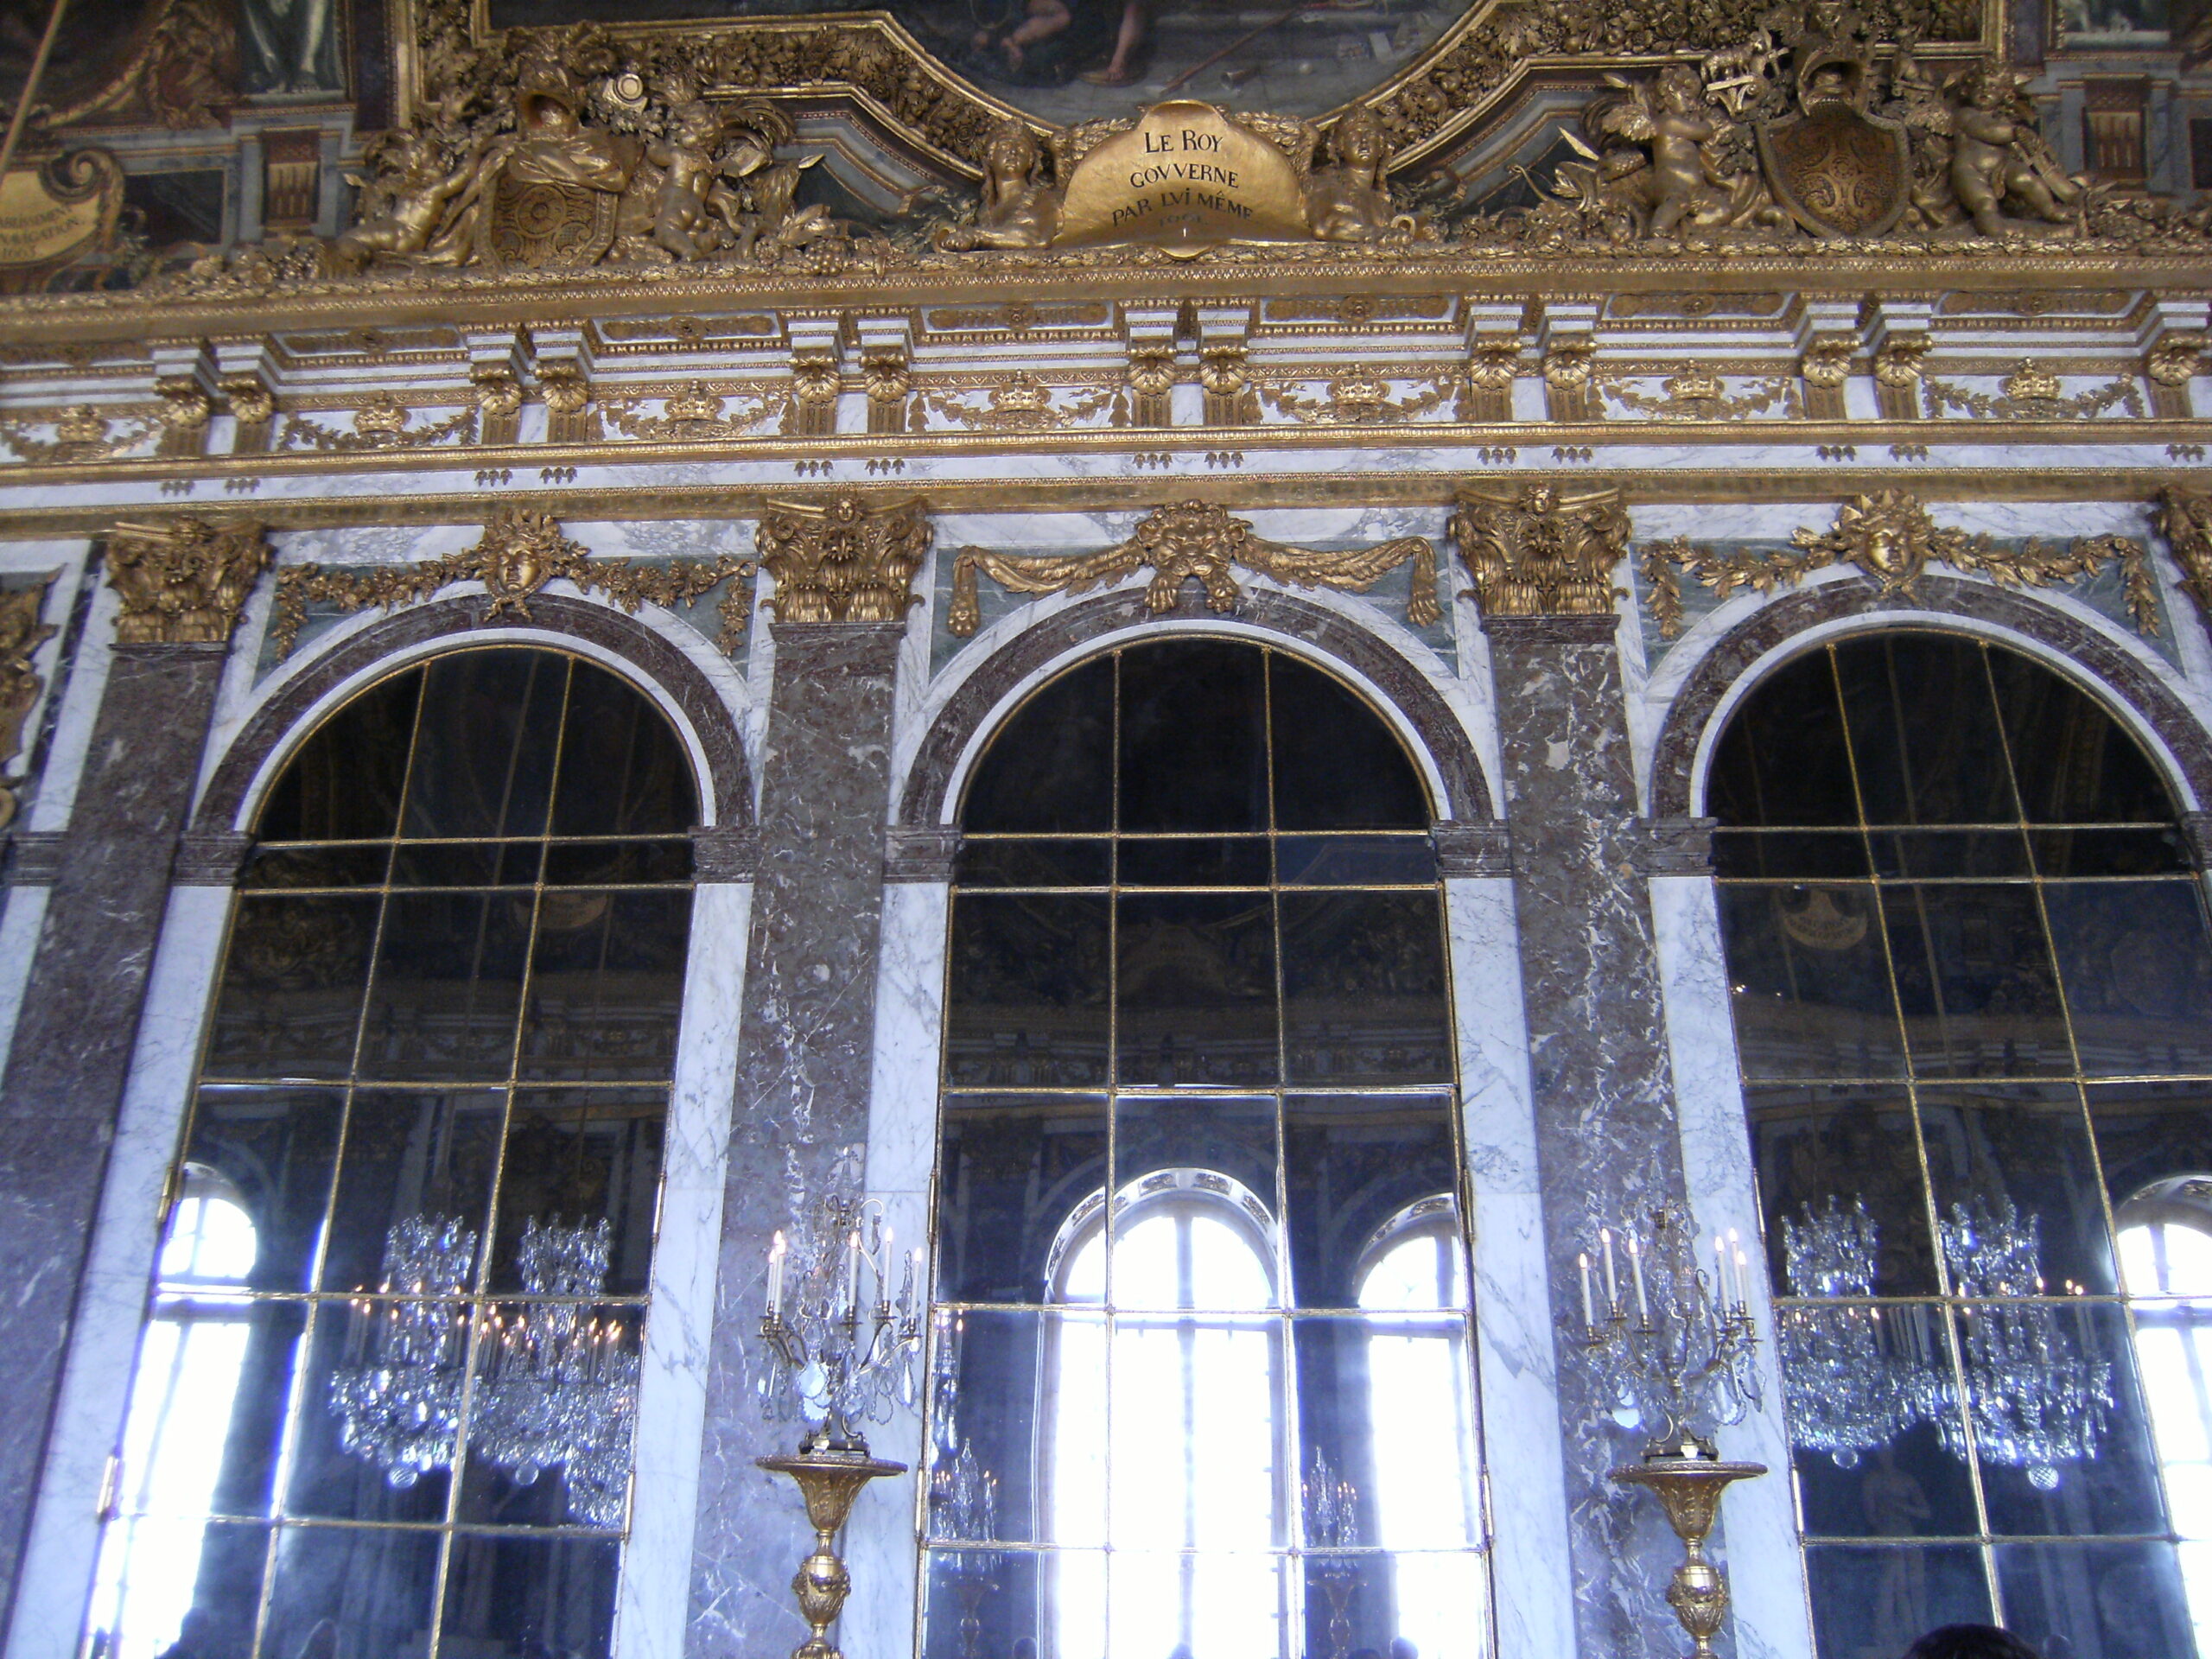 French 17th-century mirrors